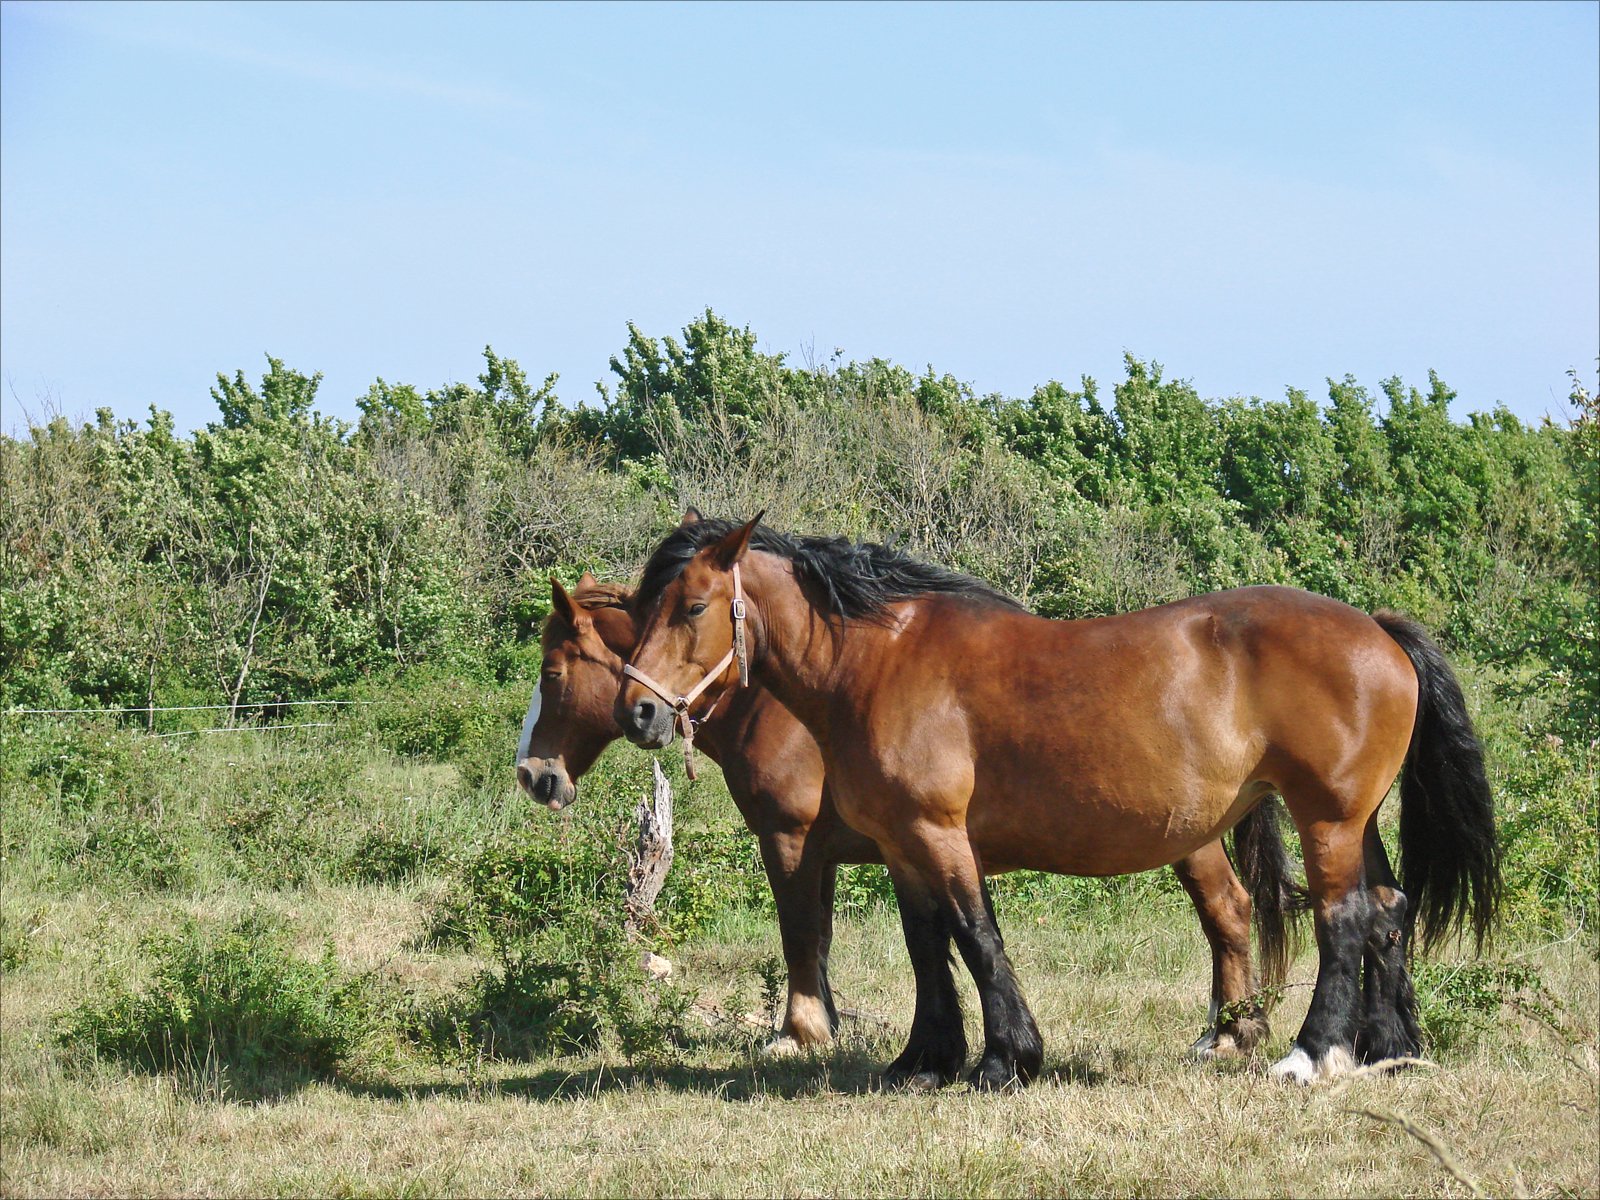 two horses standing in a field with trees